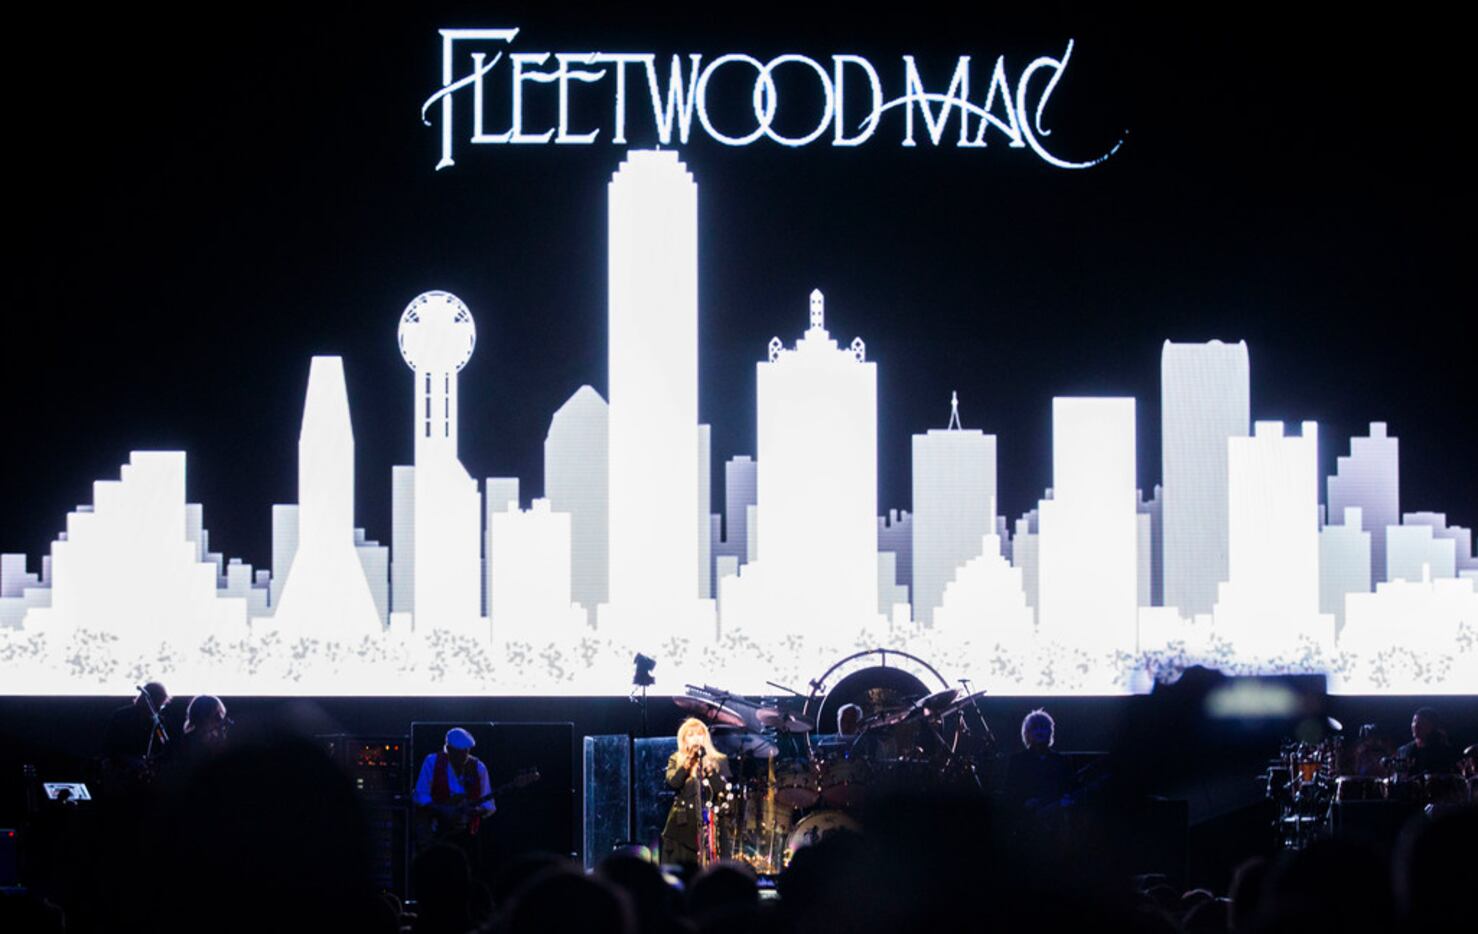 Fleetwood Mac singer Stevie Nicks talks to the audience between songs "The Chain" and...